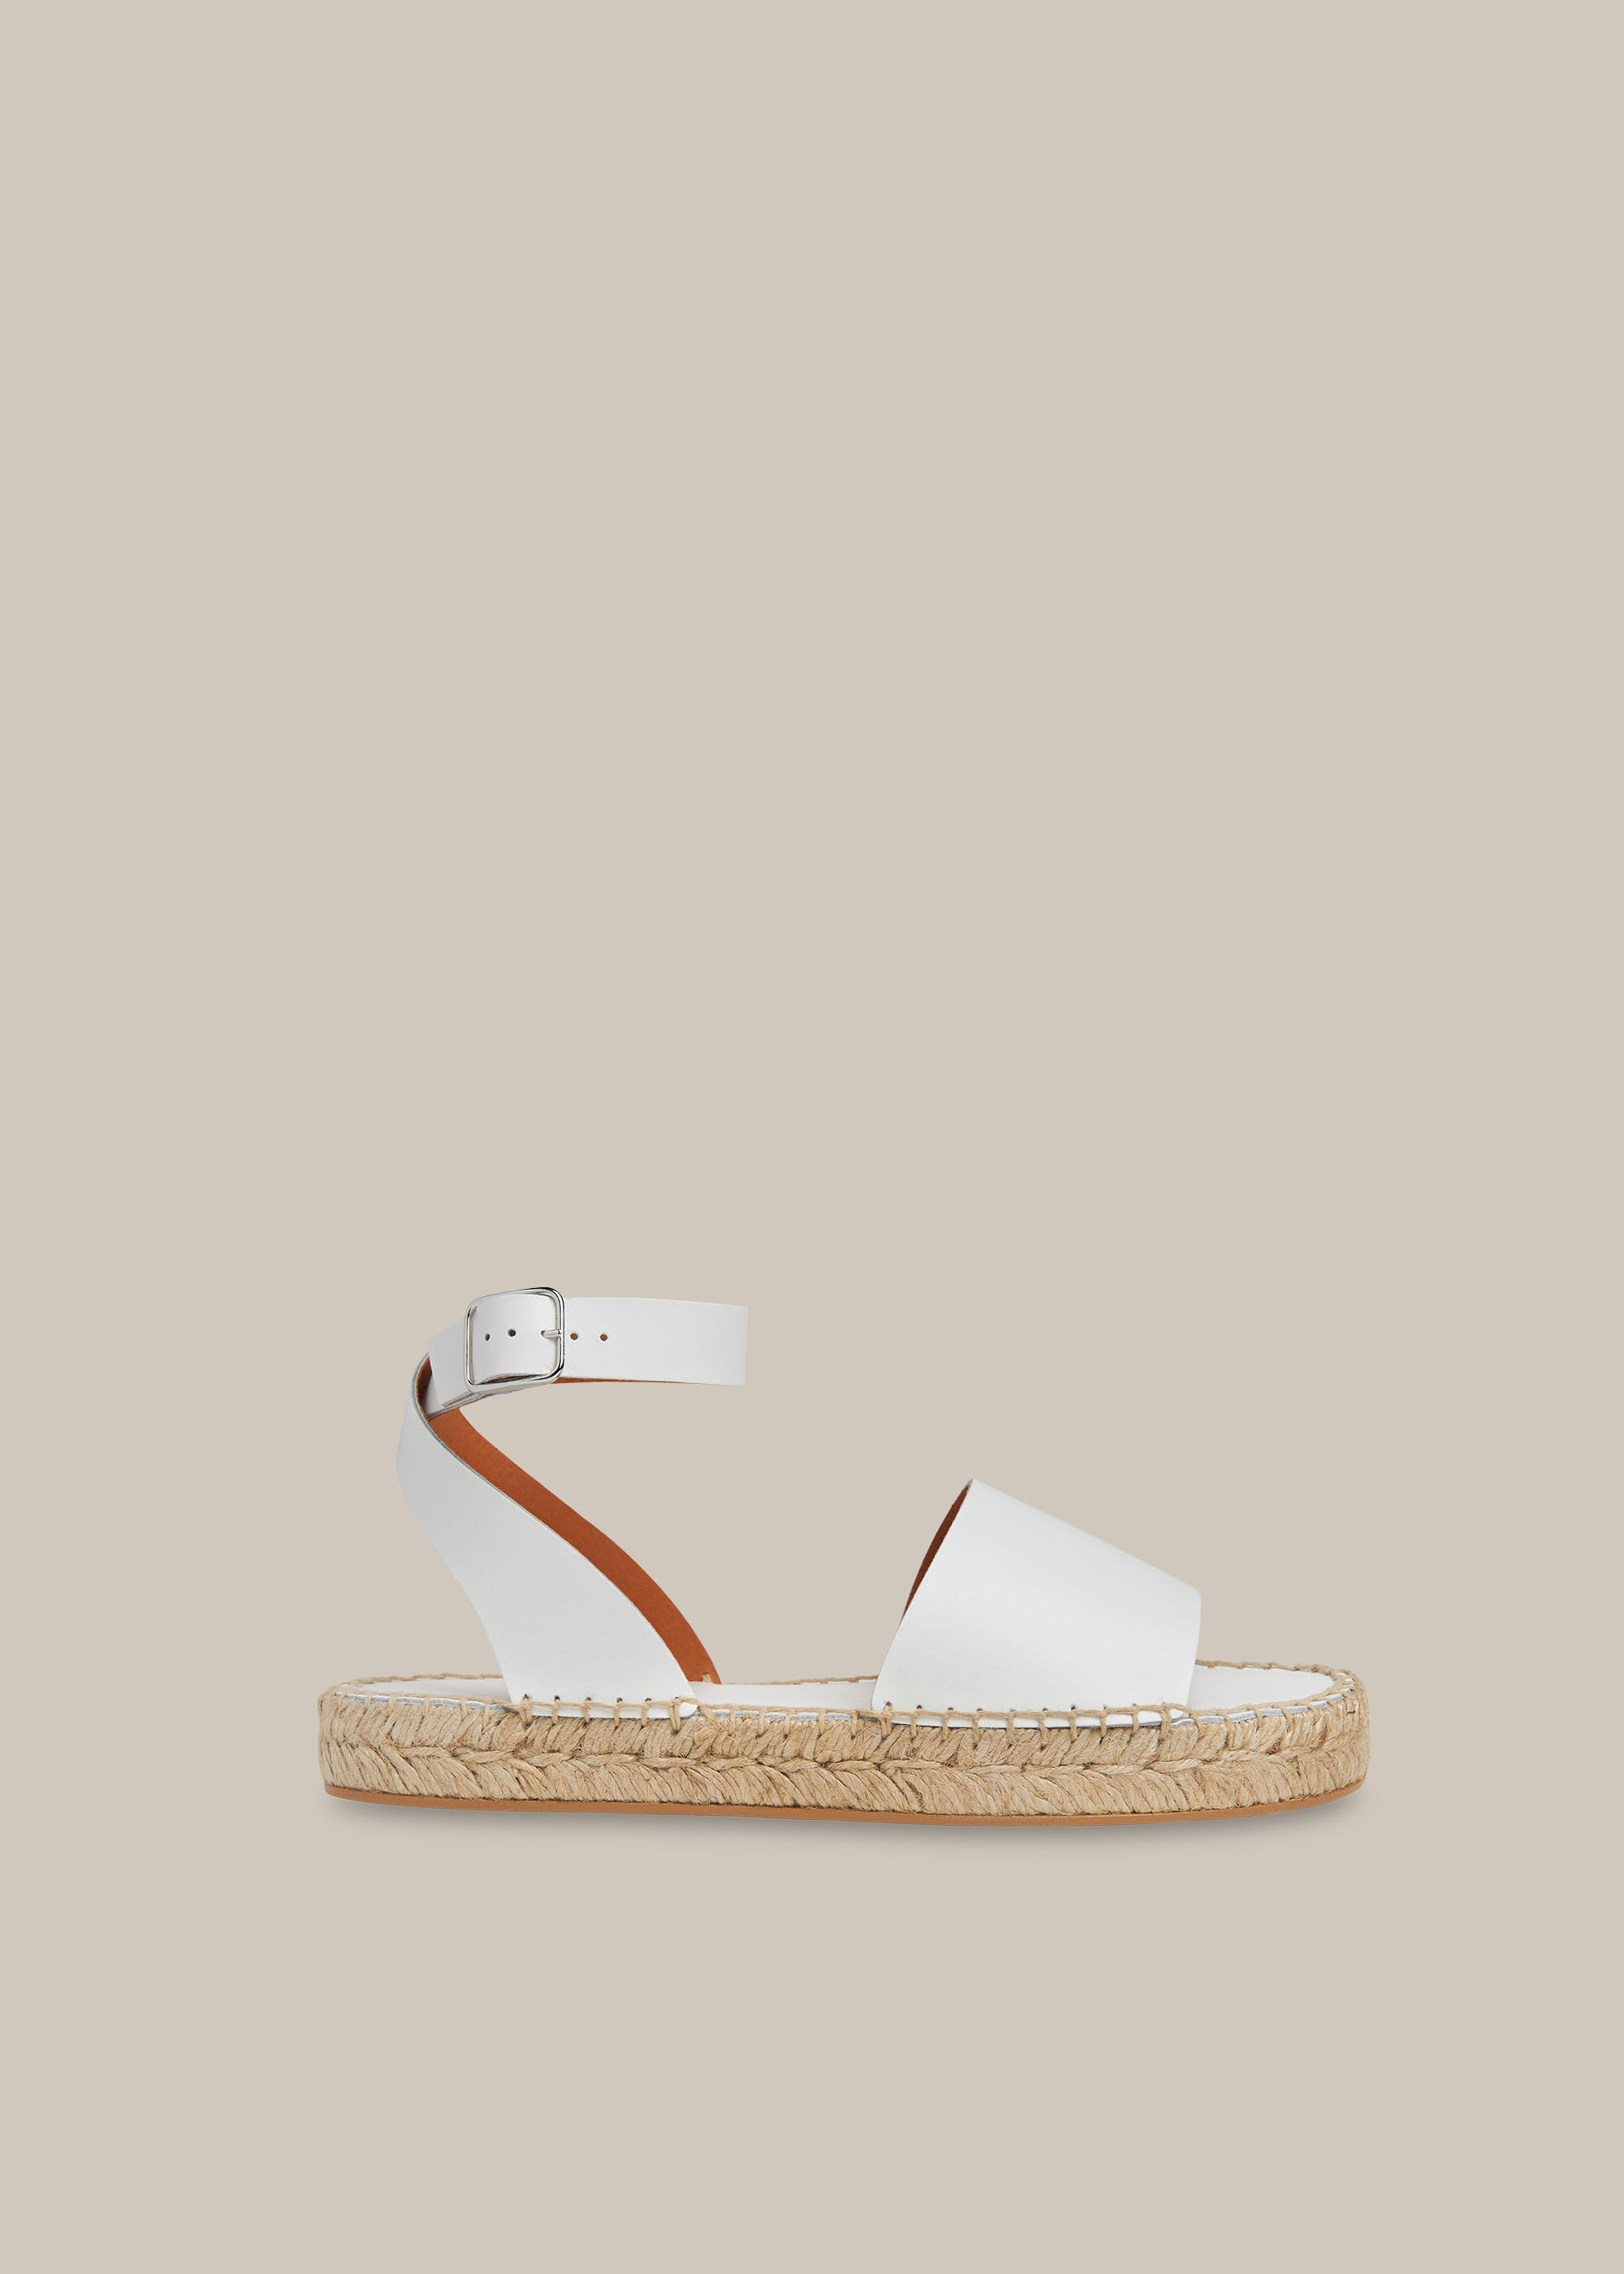 white leather espadrille sandals